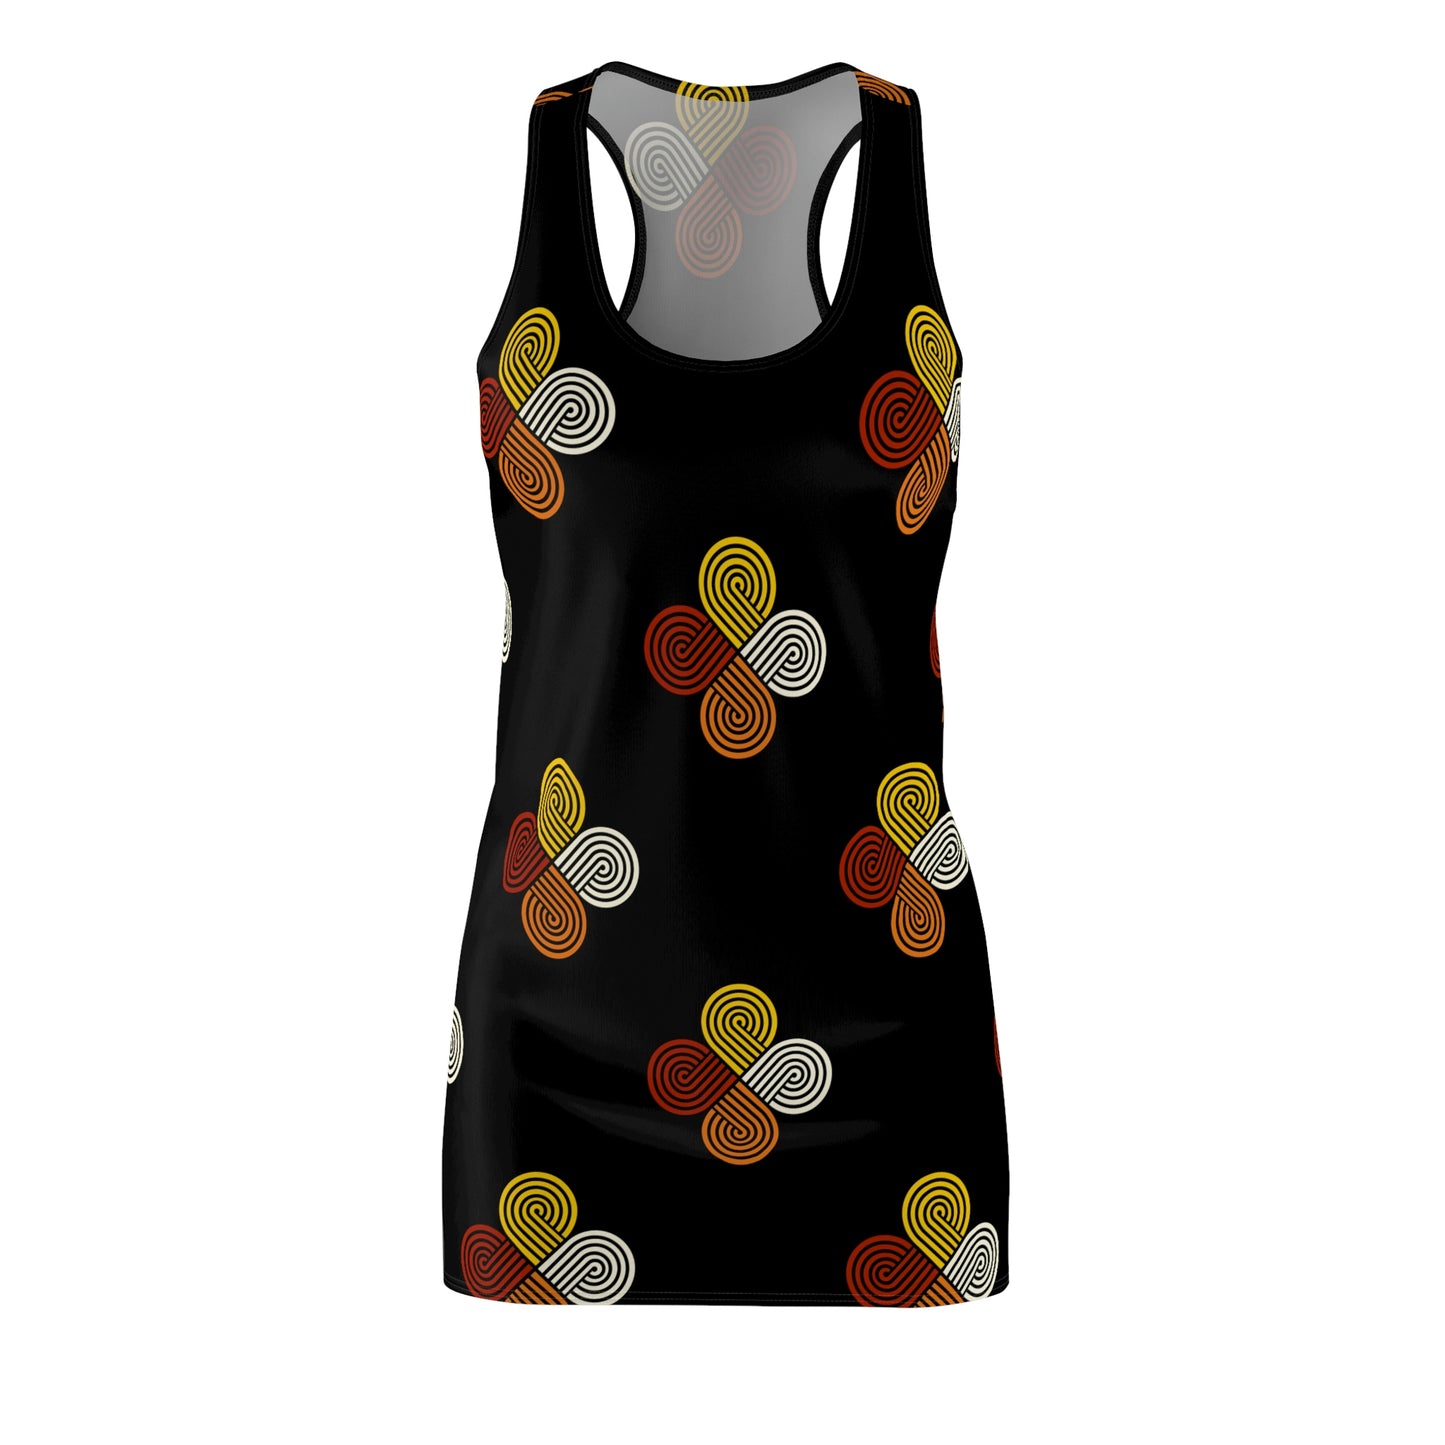 Fire in Four Directions Dress